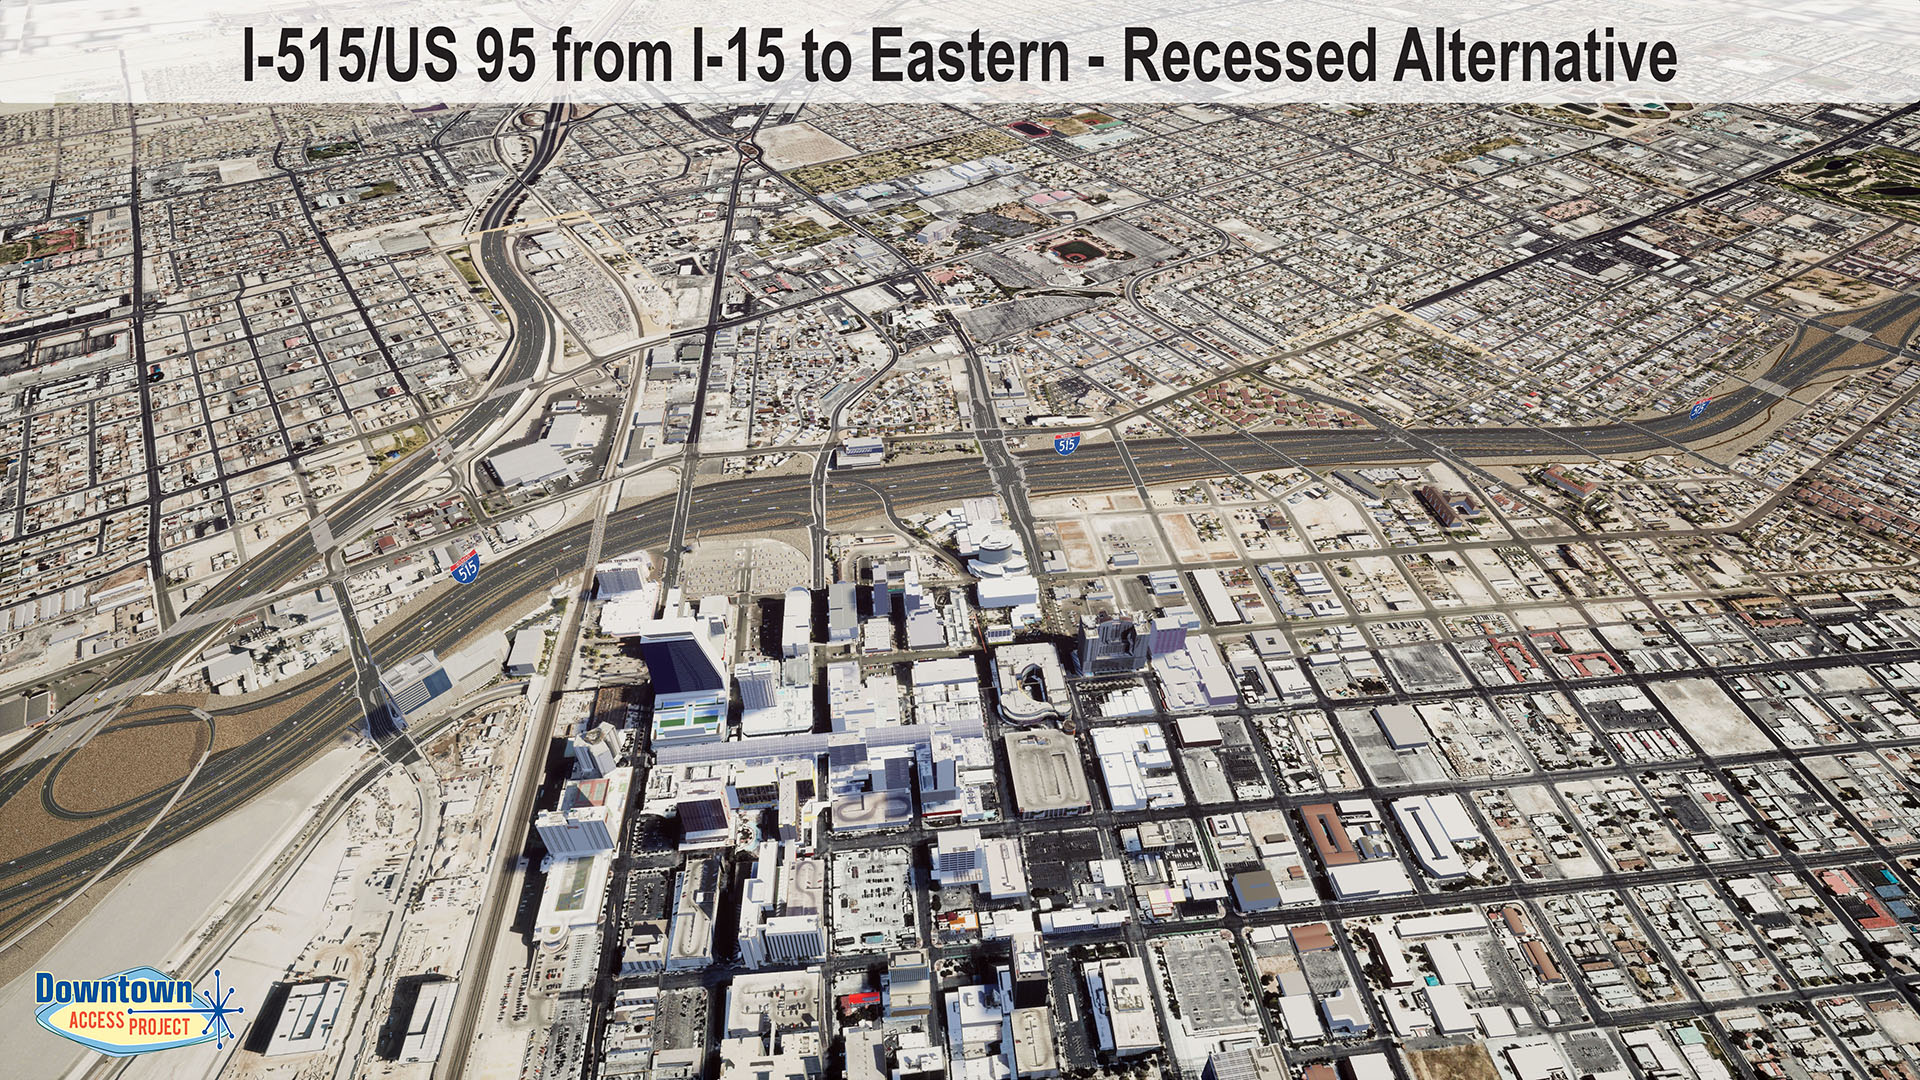 I-515/US 95 for I-15 to Eastern - Recessed Alternative